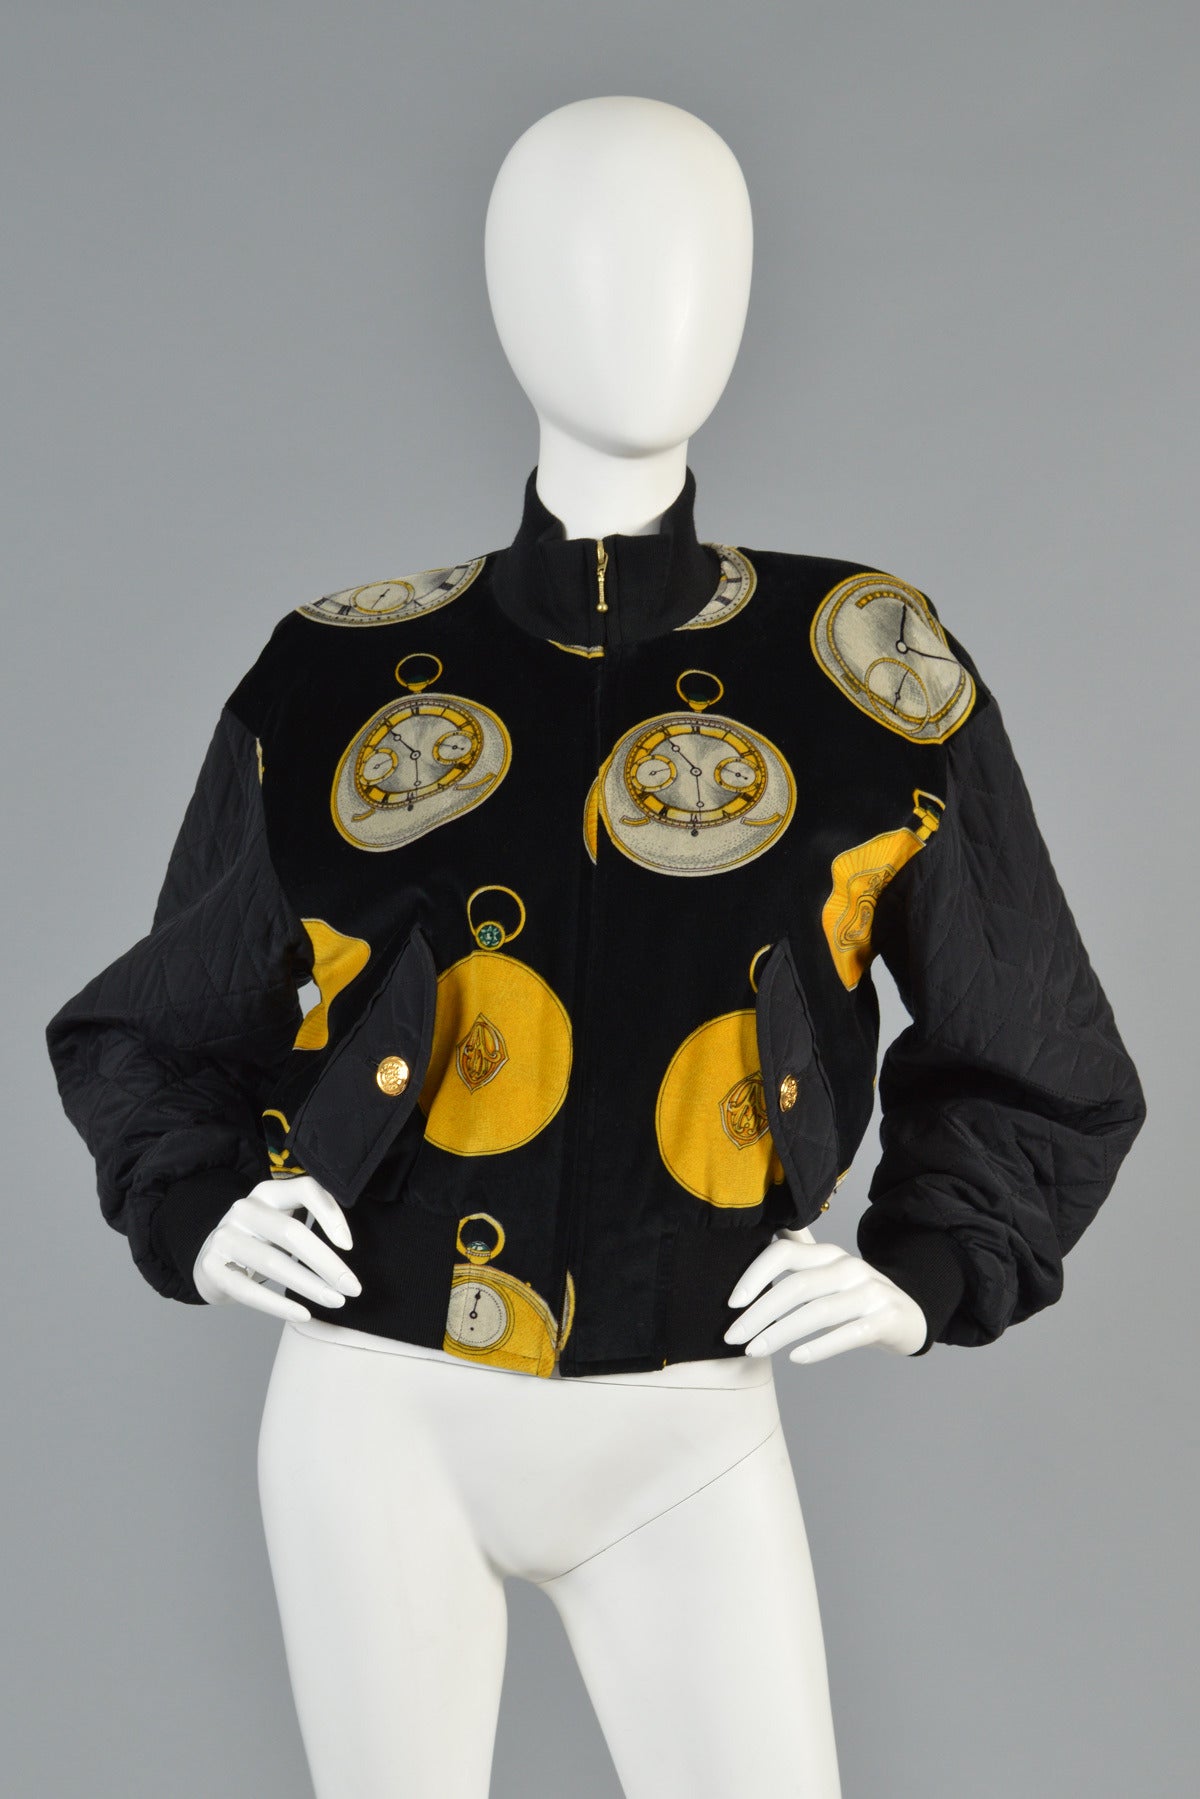 Super sweet vintage 1980s Escada bomber jacket. Black velvet body with graphic black/white/gold pocket watch print. Quilted silk sleeves + flap pockets. Zip front. Excellent condition. 

MEASUREMENTS
Bust: 40